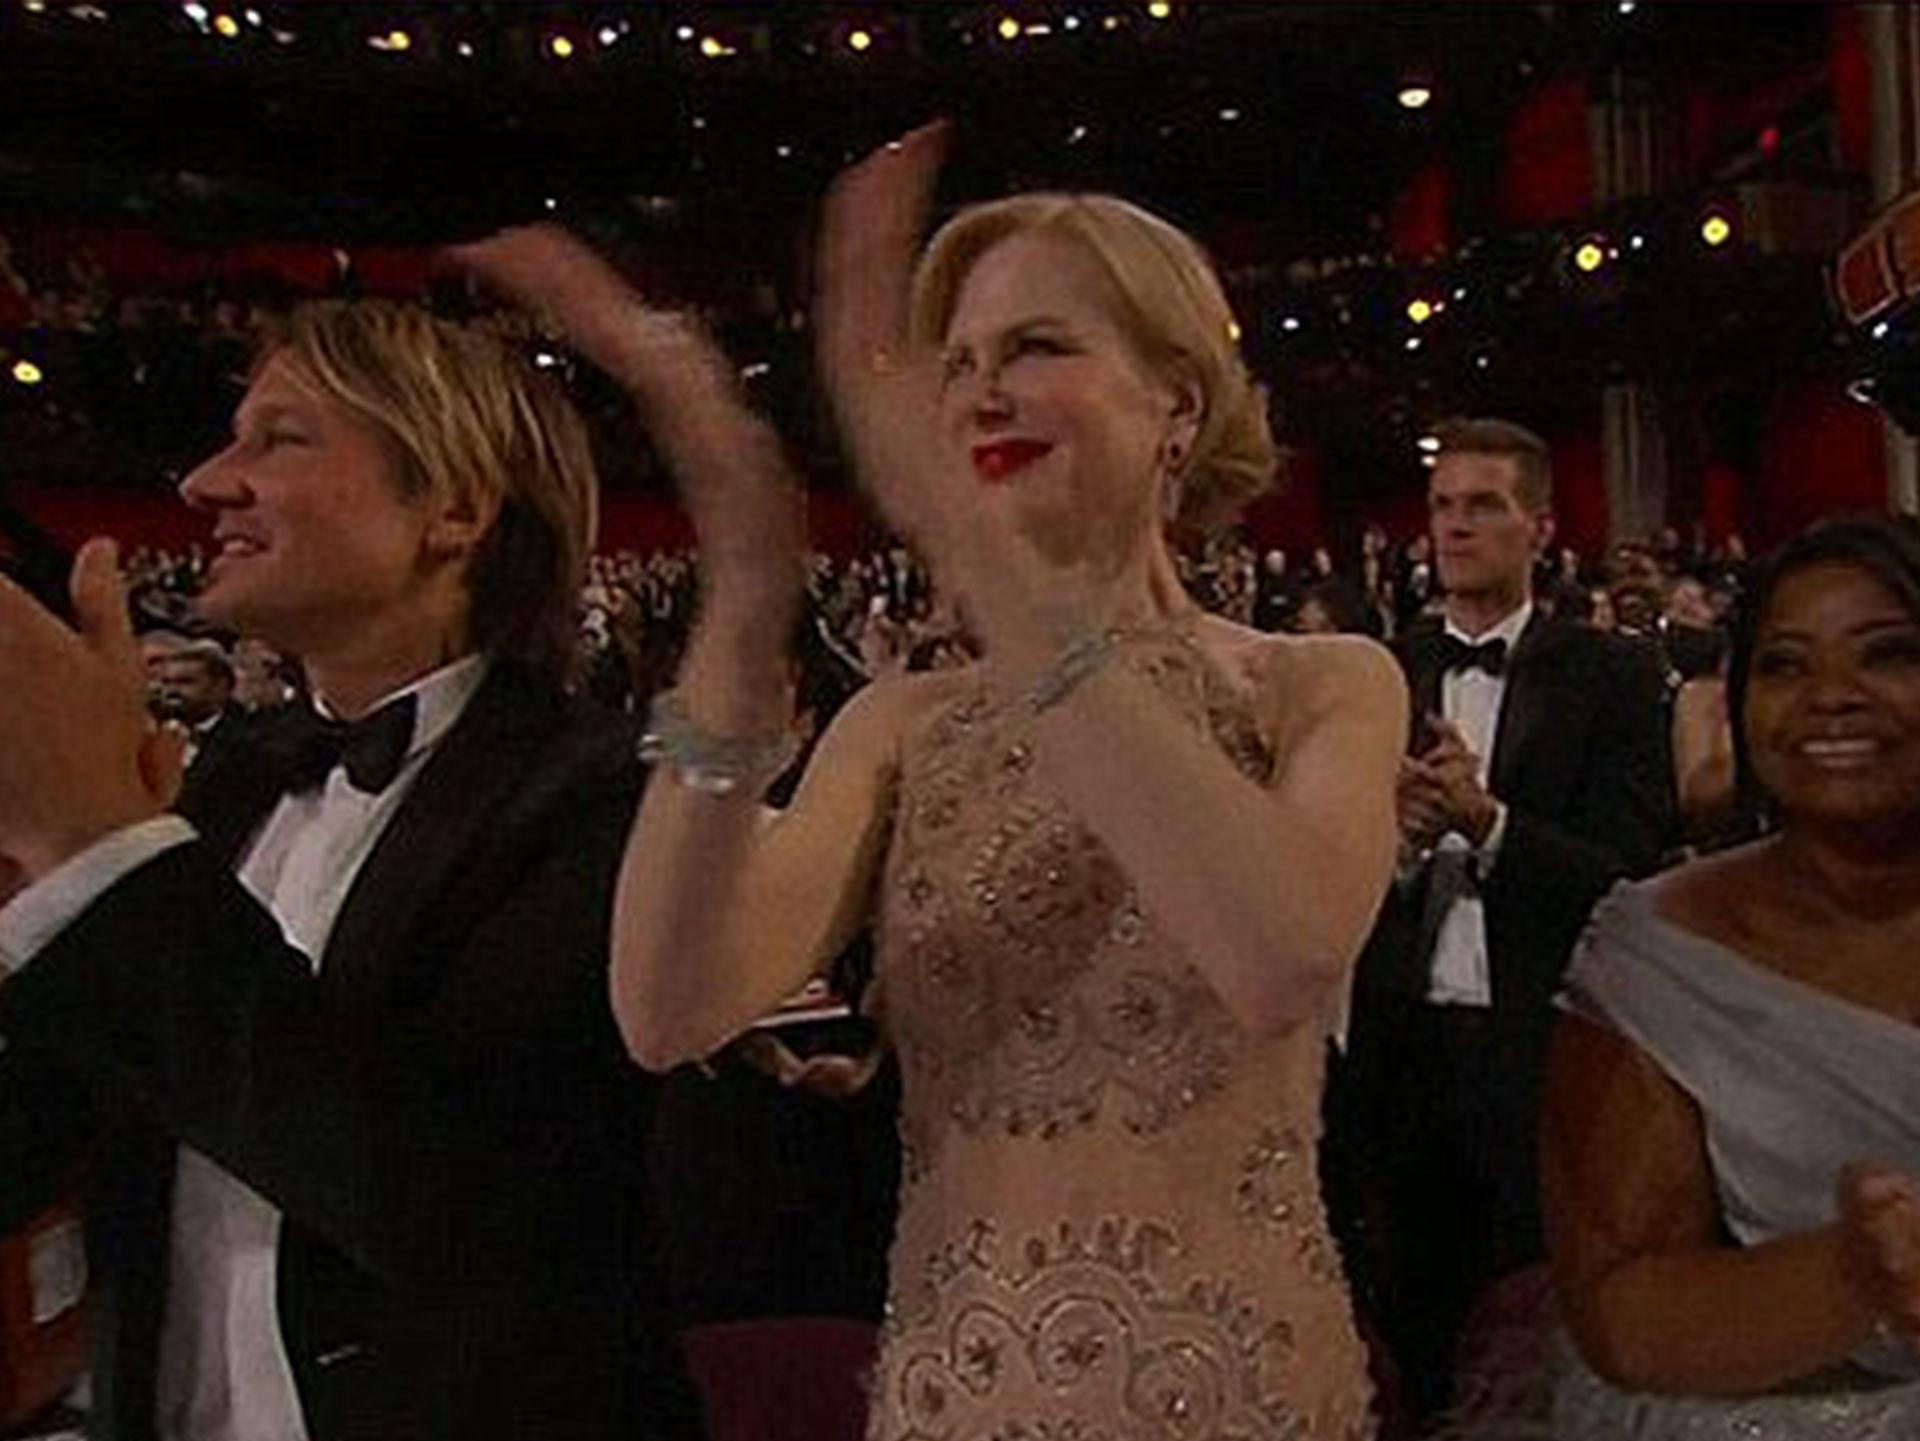 Nicole Kidman finally explains her infamous ‘seal clap’ at the Oscars